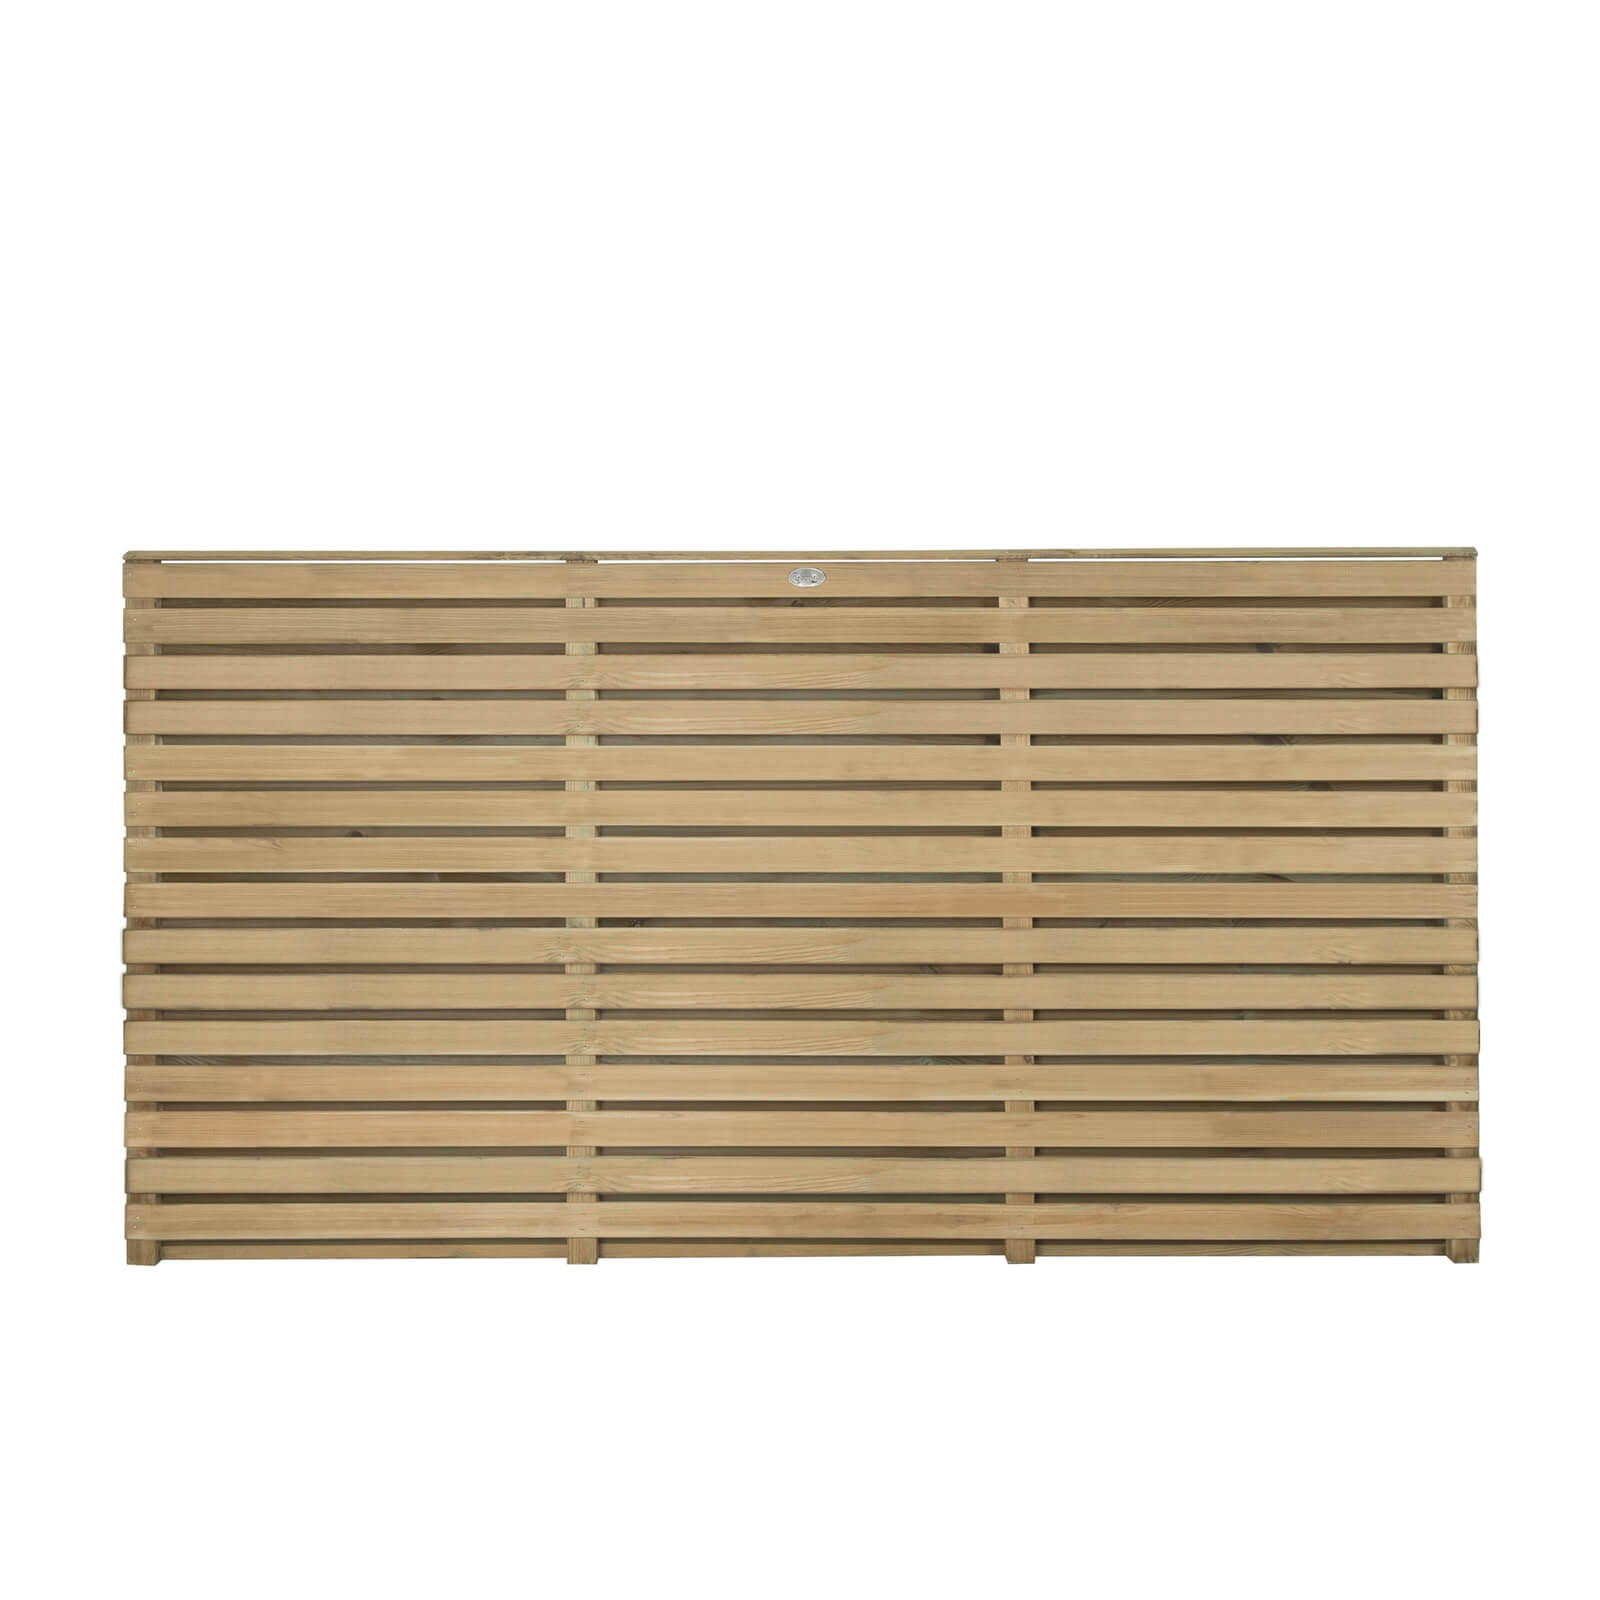 Forest Double Forest Slatted Fence Panel - 3ft - Pack of 5